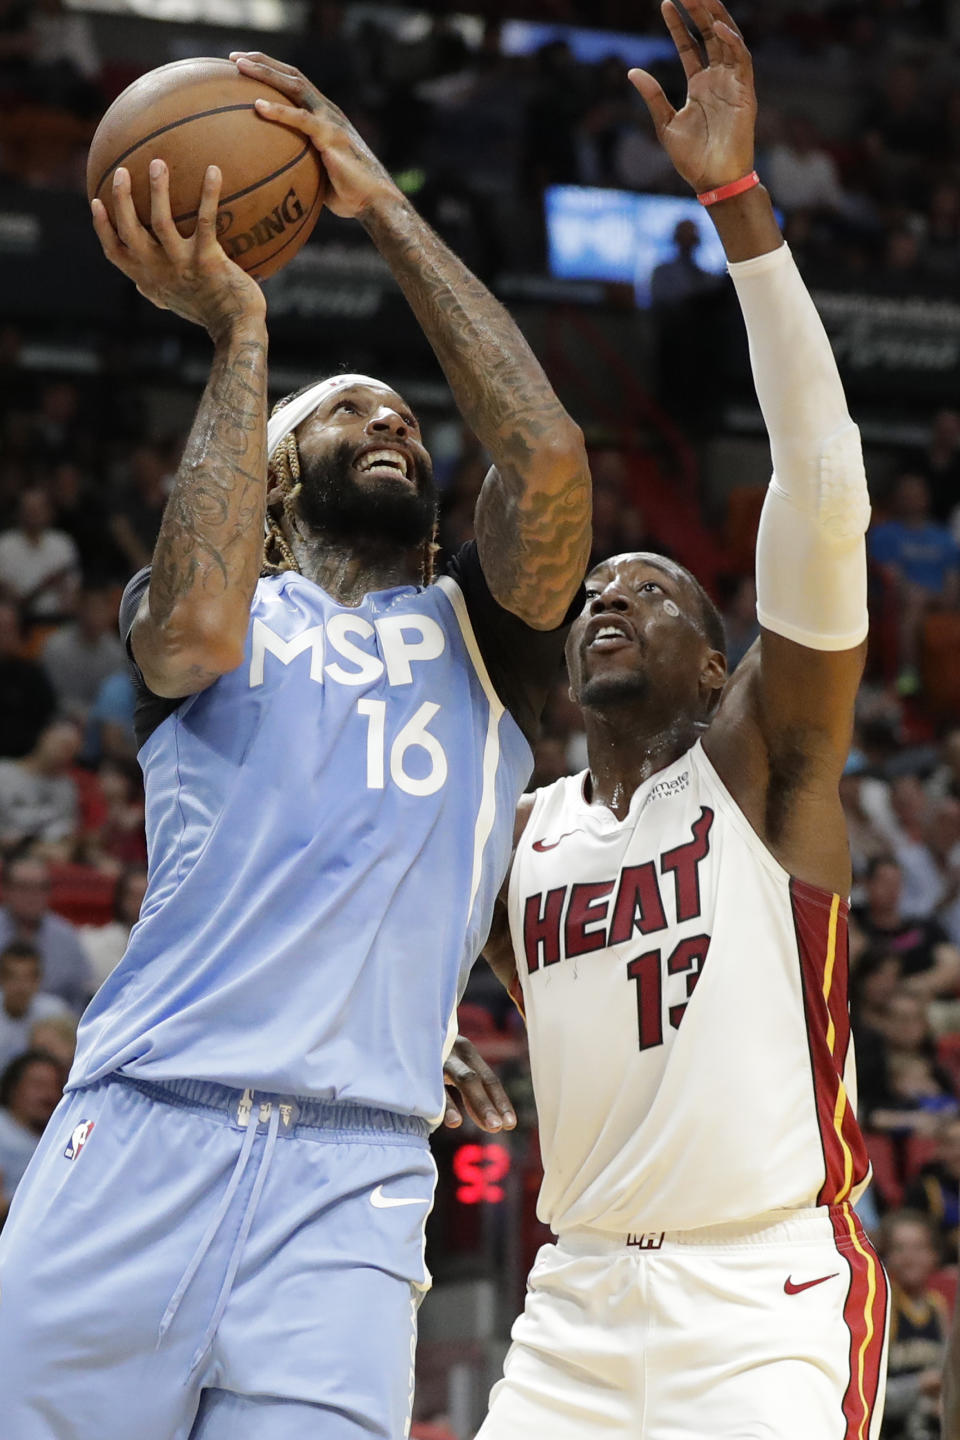 Minnesota Timberwolves forward James Johnson (16) goes up for a shot against Miami Heat forward Bam Adebayo (13) during the first half of an NBA basketball game, Wednesday, Feb. 26, 2020, in Miami. (AP Photo/Wilfredo Lee)